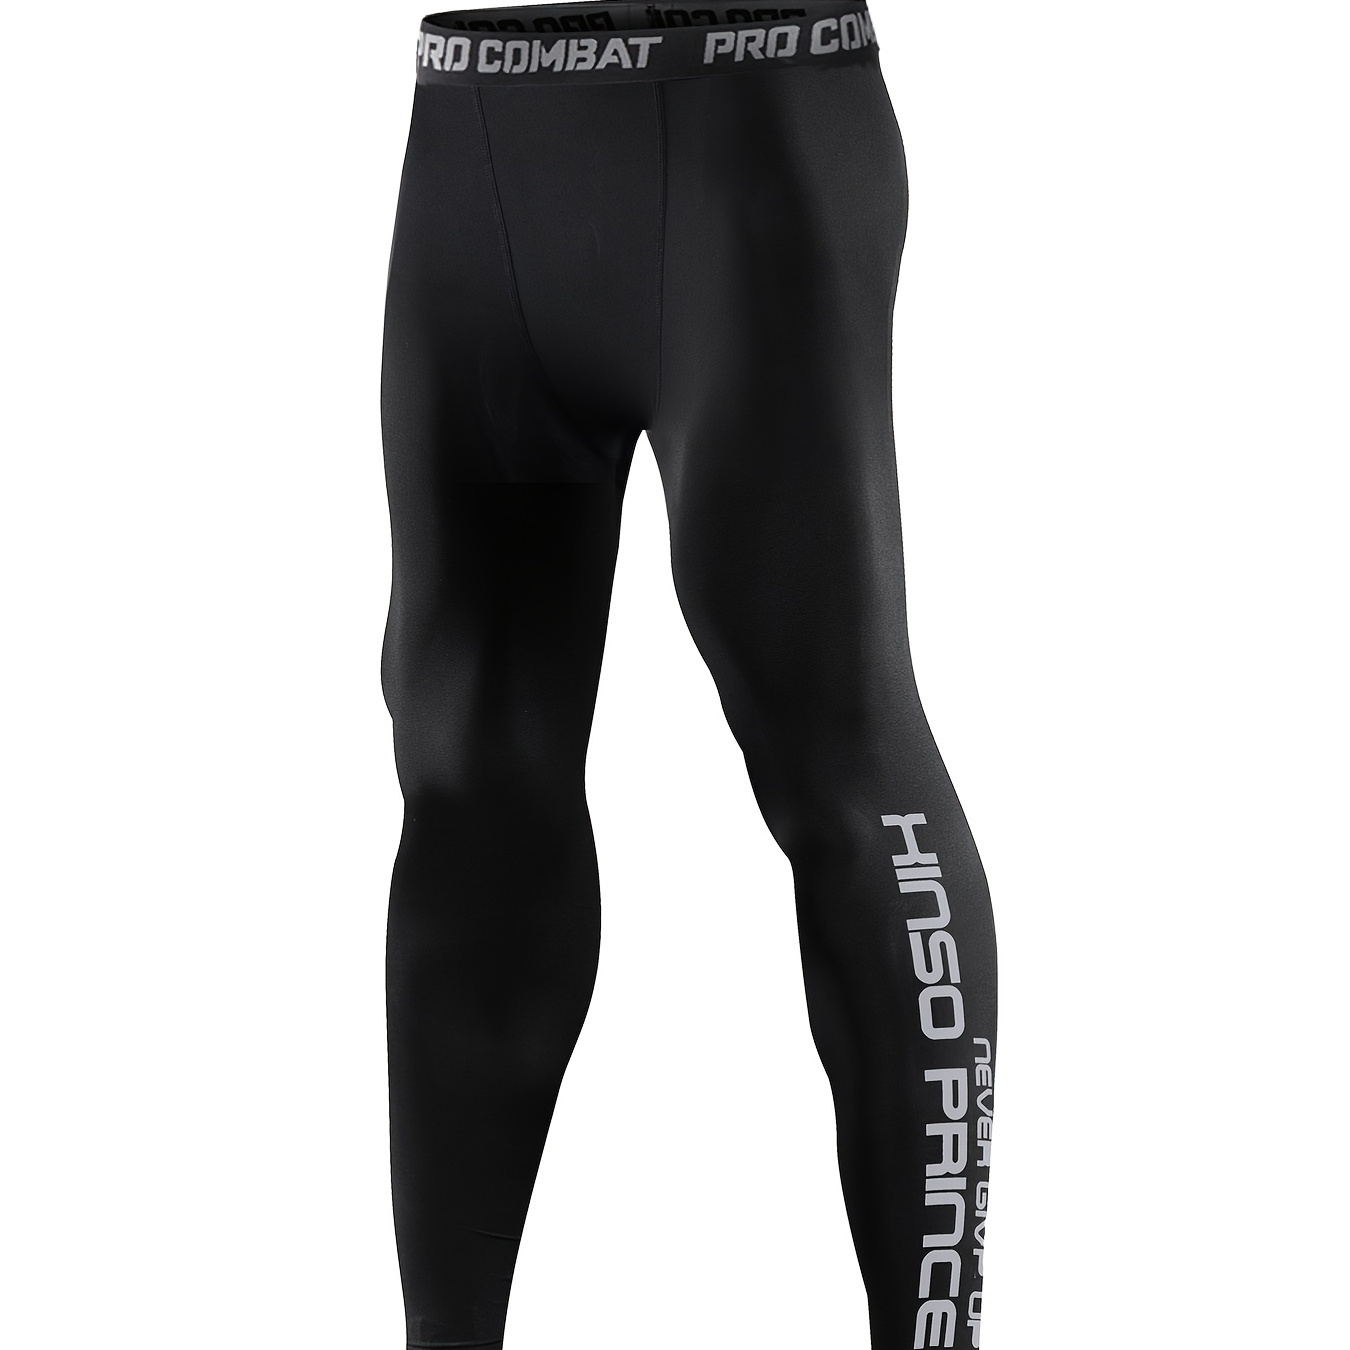 

Men's High Stretch Compression Pants - Quick Dry Sports Tights For Running & Working Out!